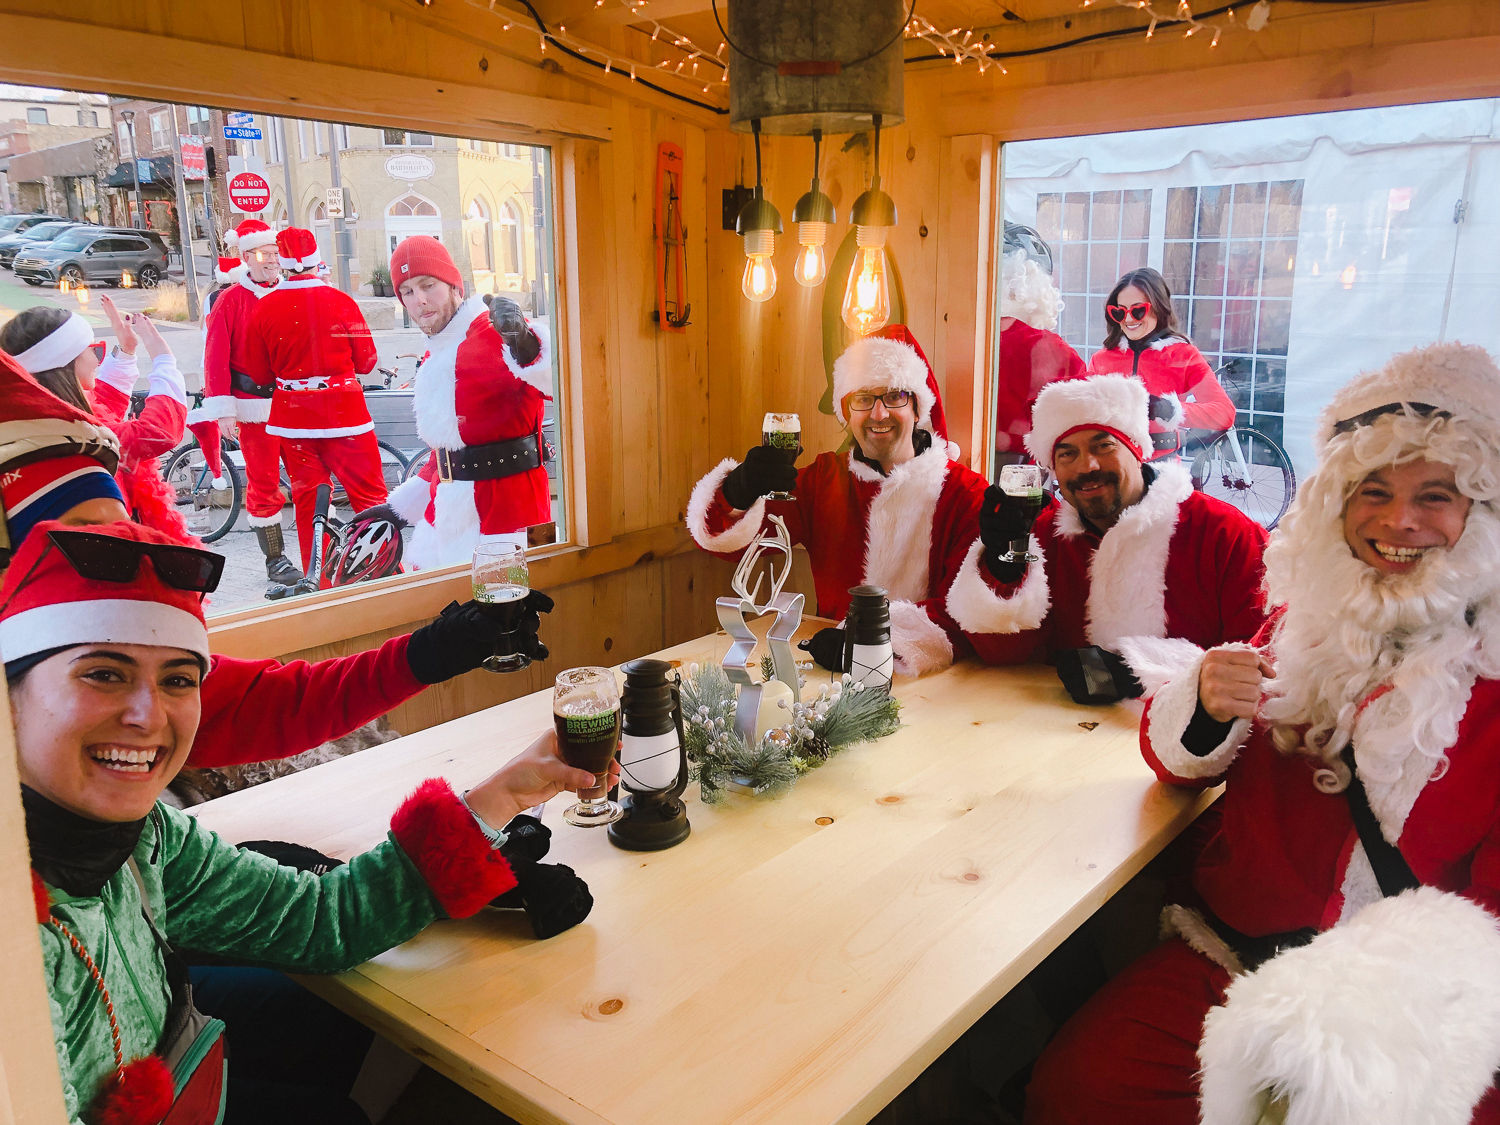 A group of friends dressed as Santa Claus toasting with a Santa Rampage bier inside a shanty